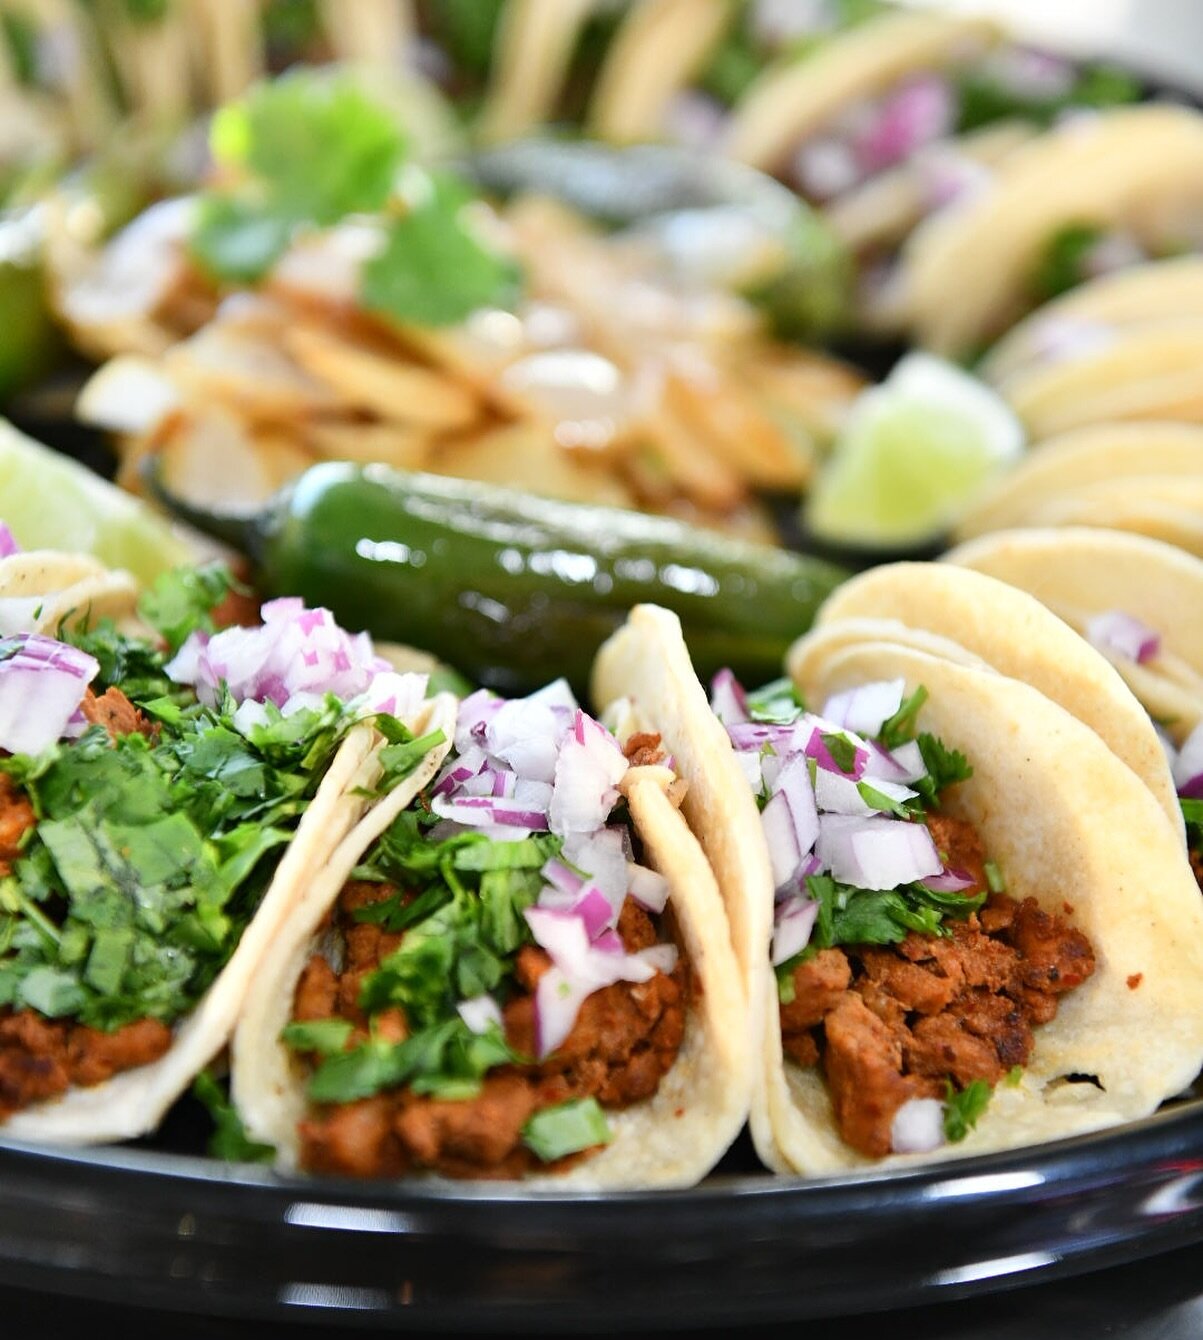 Amigos we are OPEN! Come get your taco fix! What are your favorite types of 🌮? 

Speaking of tacos, who is ready for the SUPER BOWL?!? Did you know that we offer taco platters??? They are great for large gatherings or if you are a taco lover!!!!

St